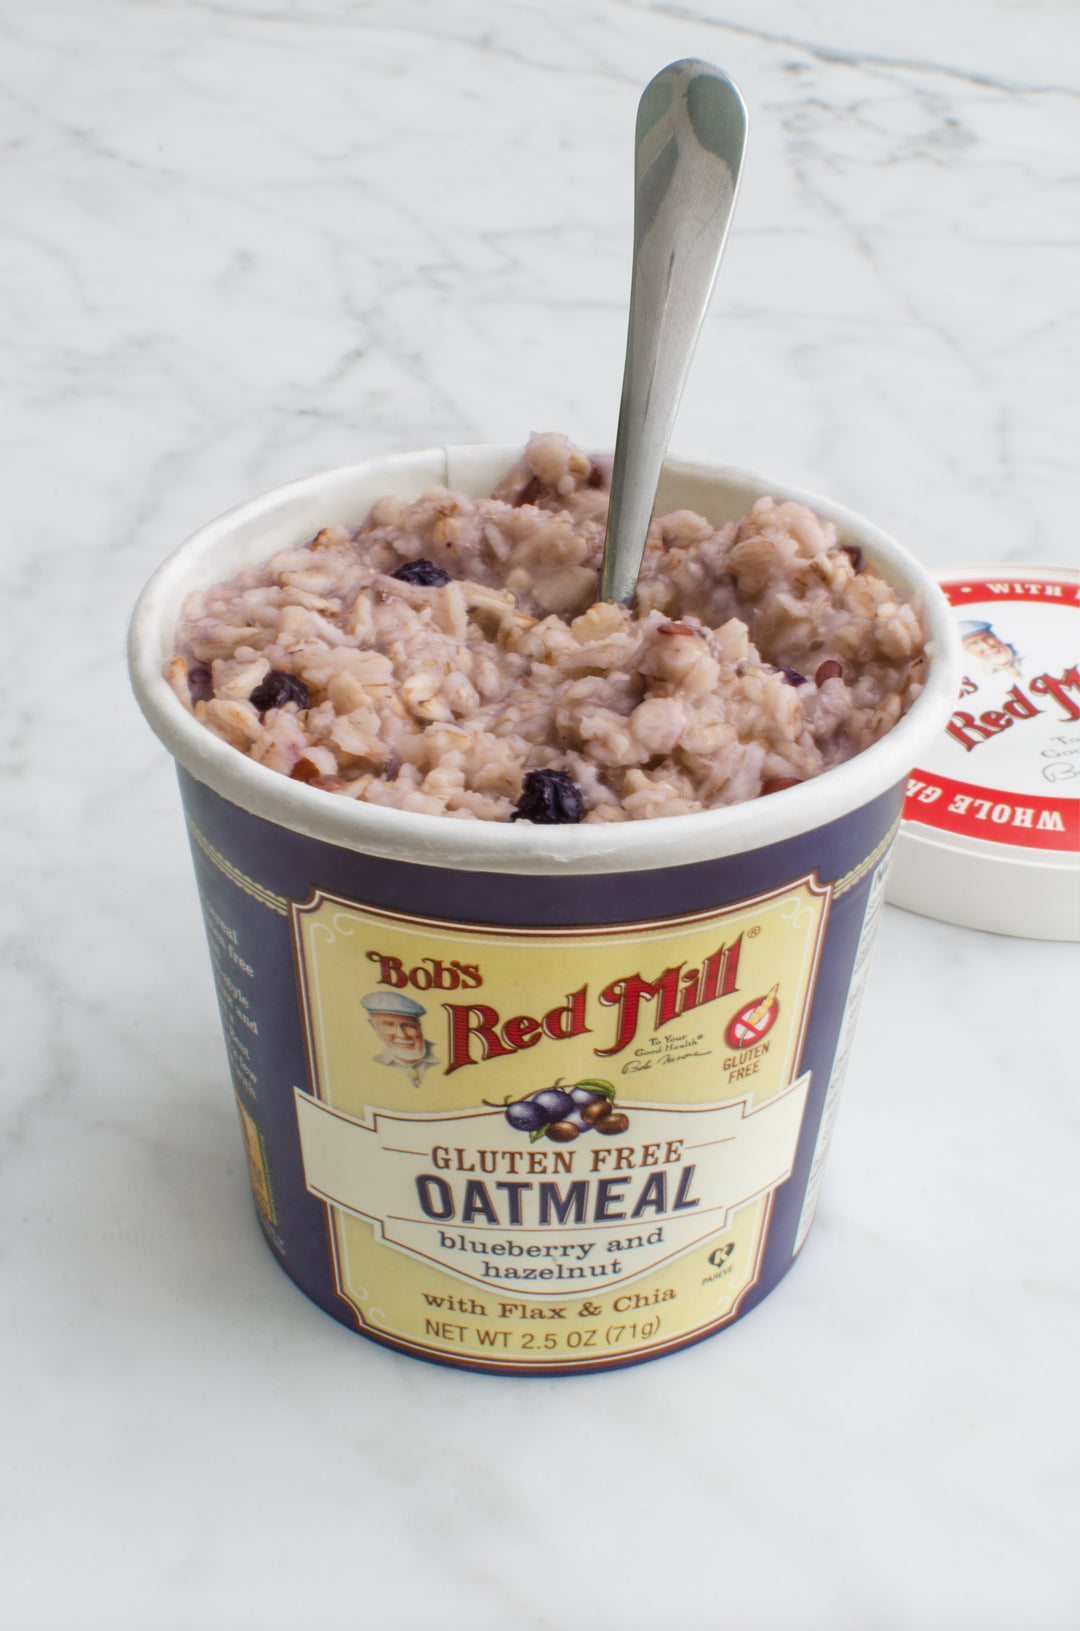 Bob's Red Mill Natural Foods Inc Gluten Free Blueberry Hazelnut Oatmeal Cup-2.5 oz.-12/Case